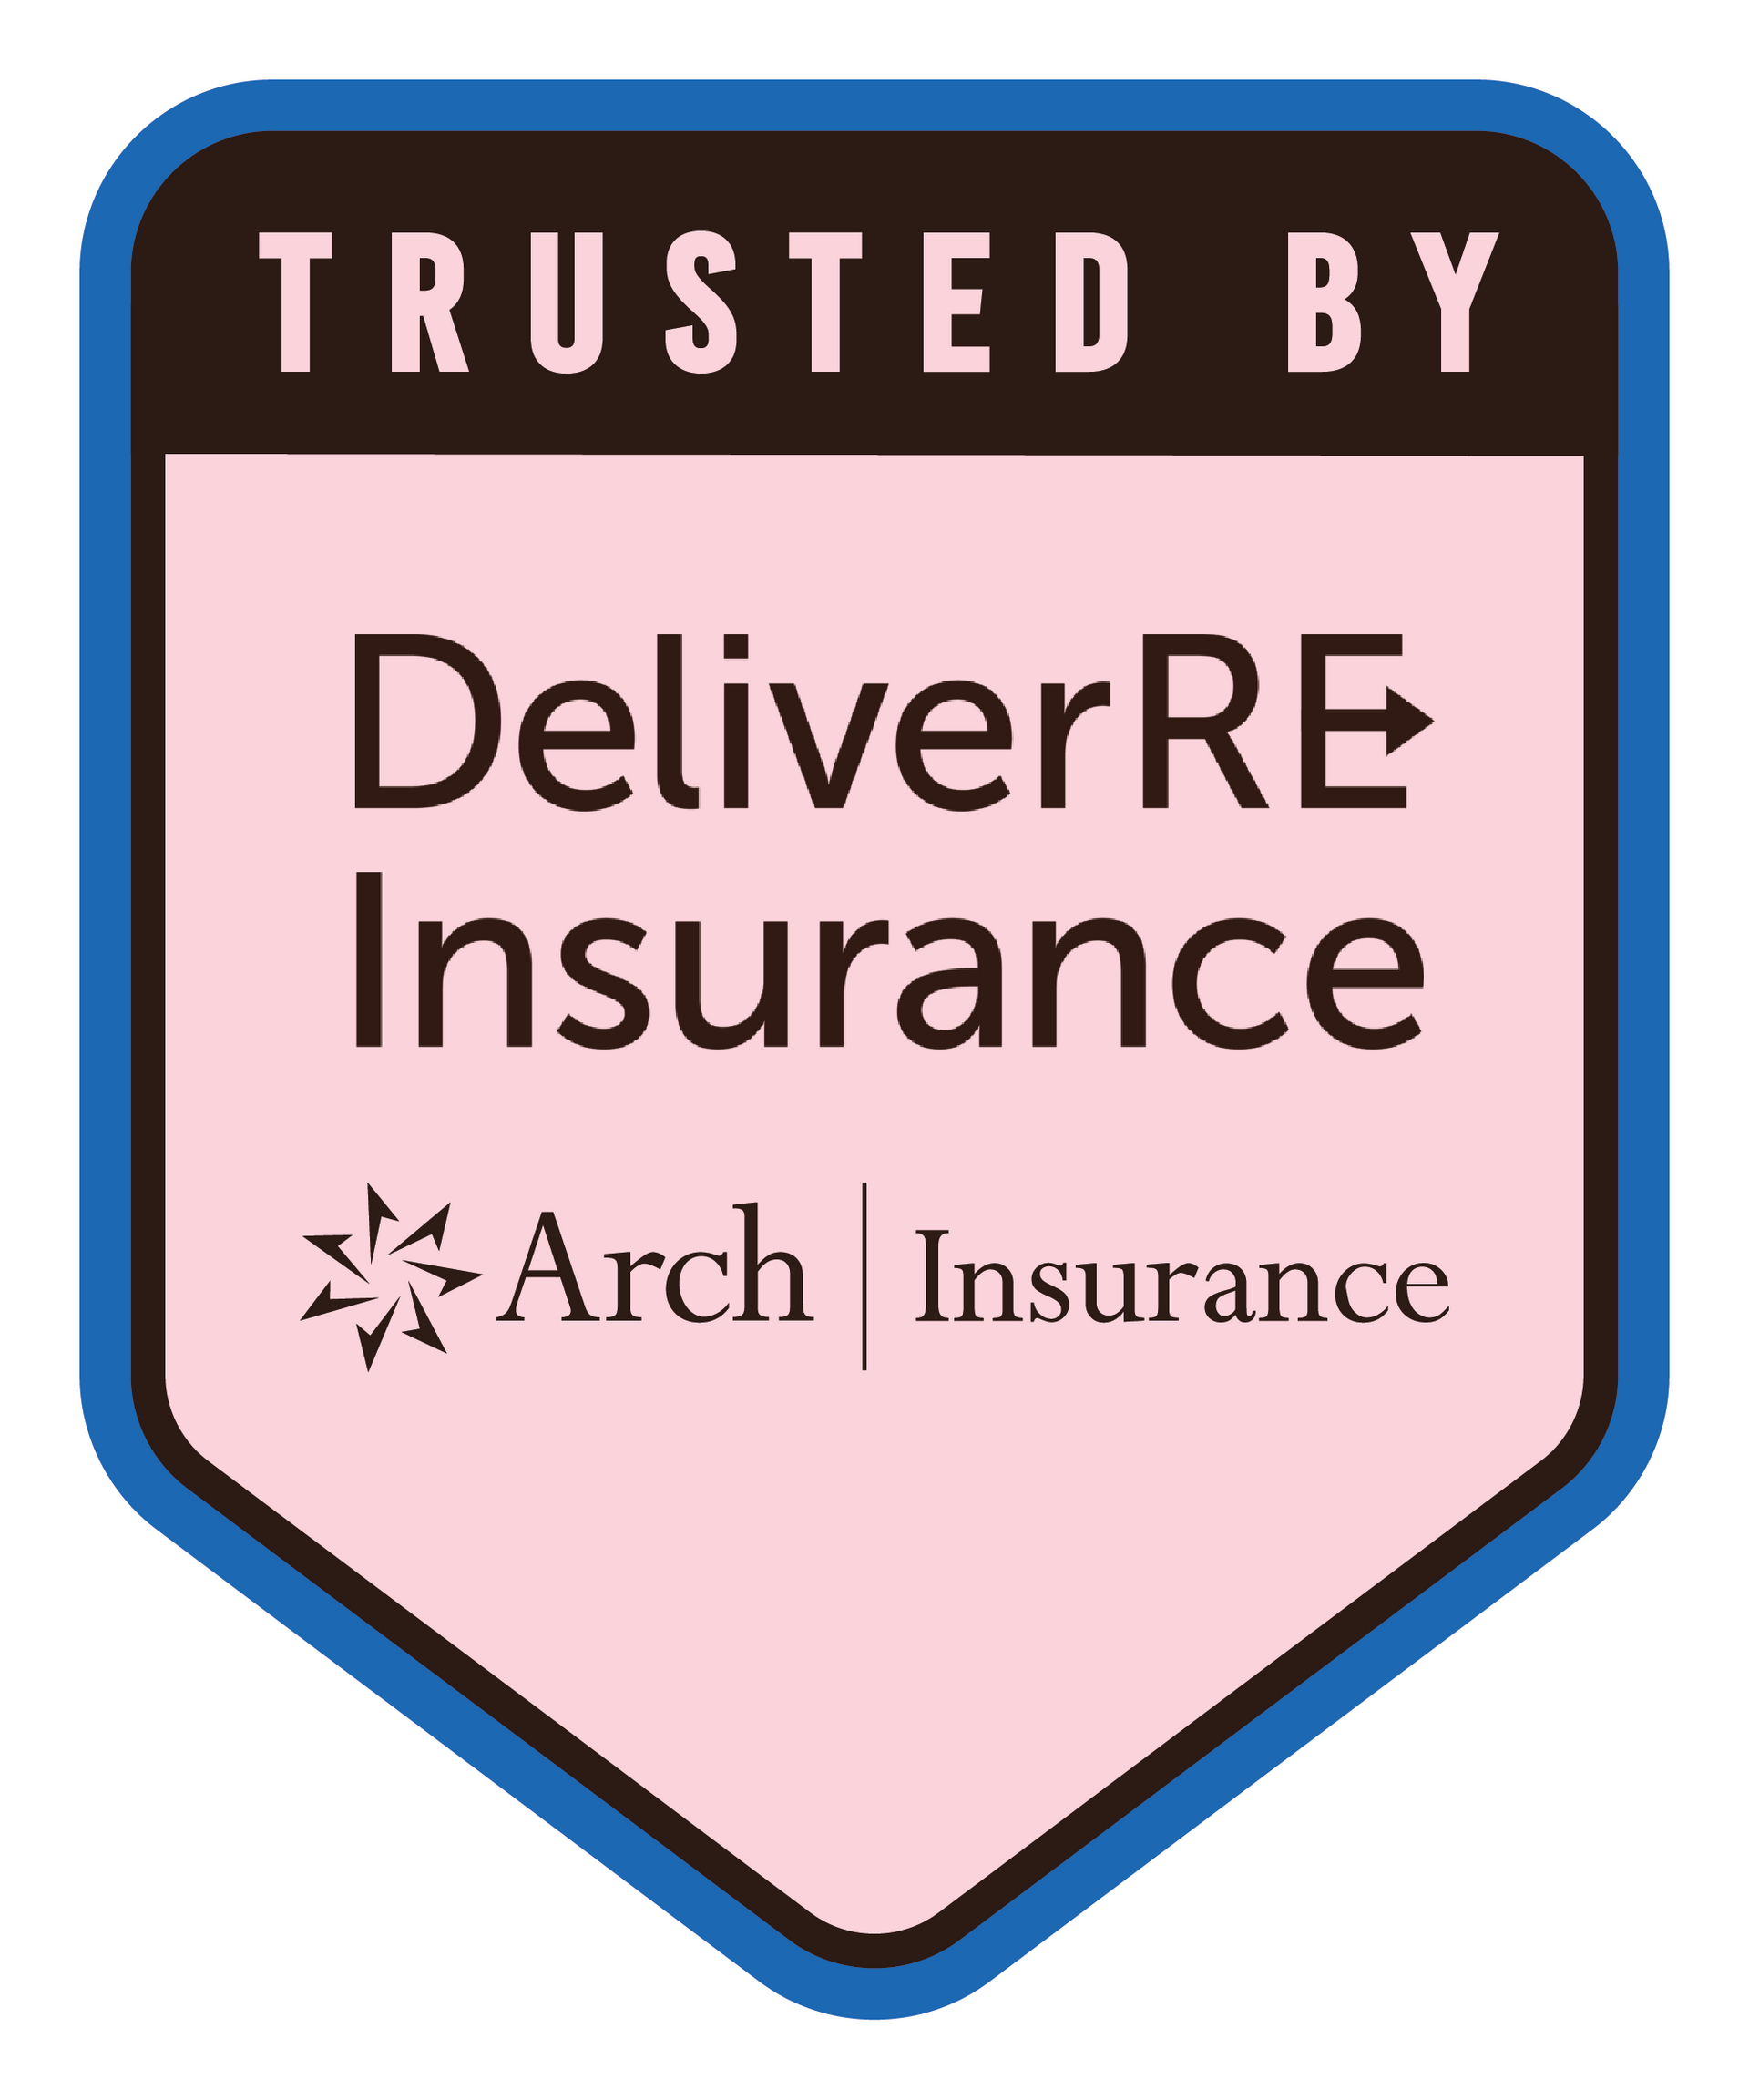 A badge that says `` trusted by deliverre insurance ''